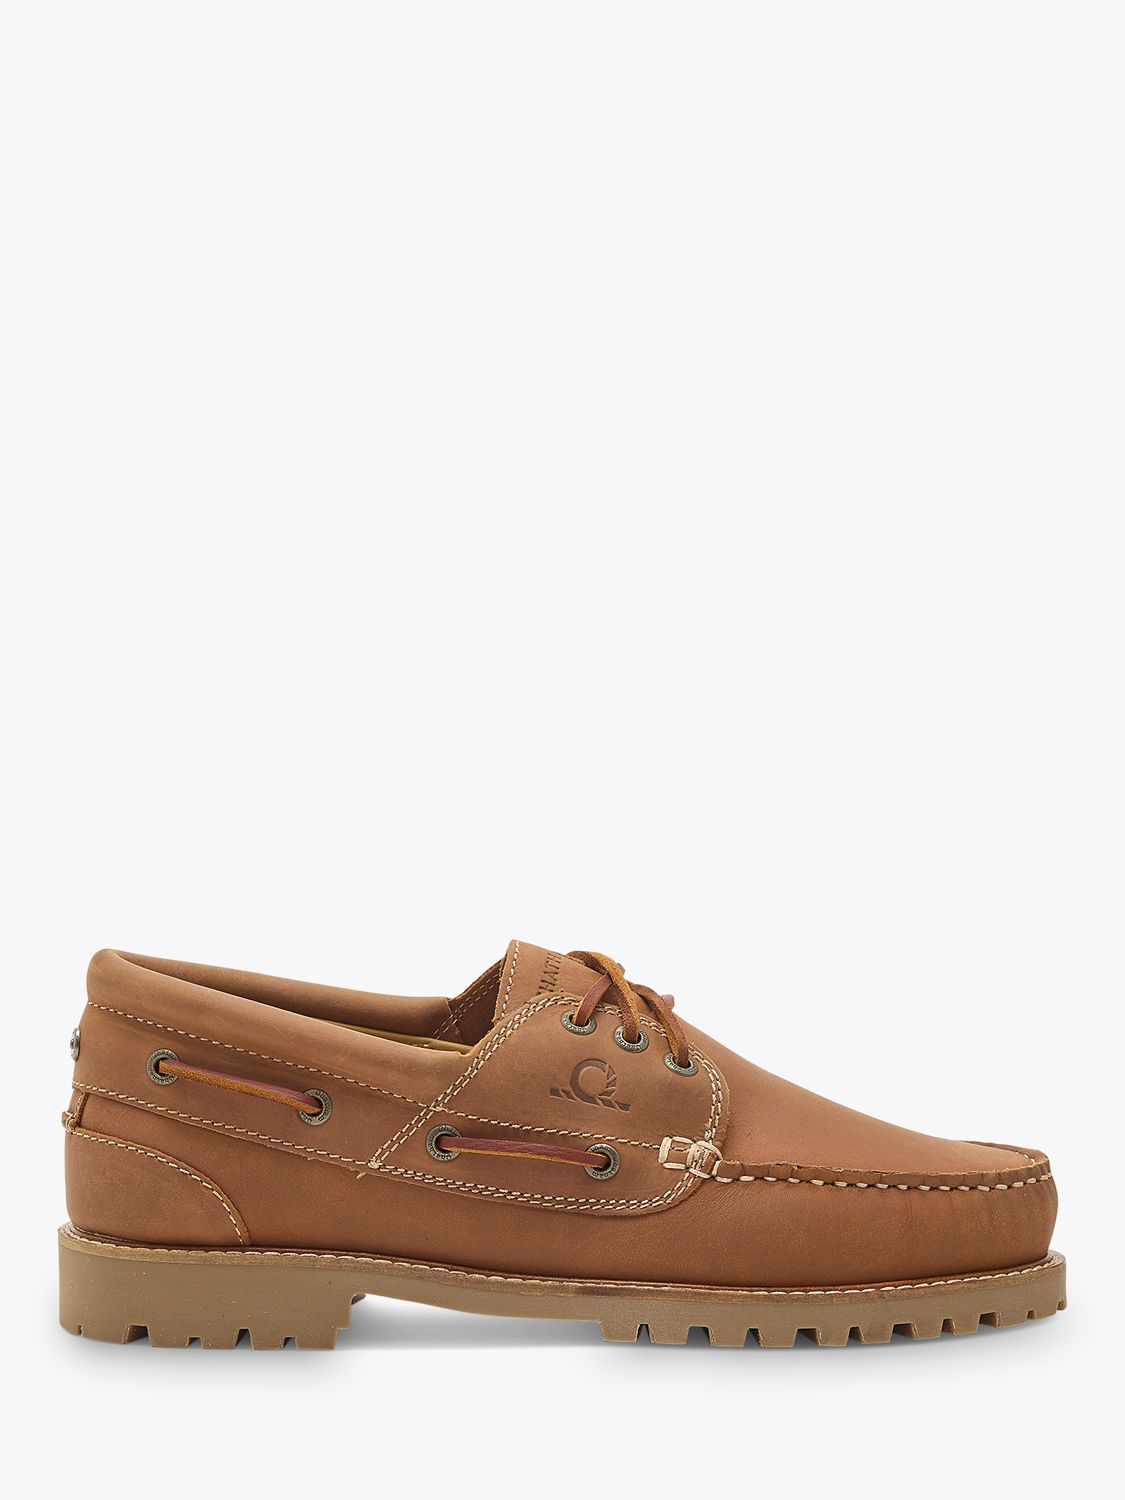 Chatham Sperrin Leather Boat Shoes, Tan at John Lewis & Partners